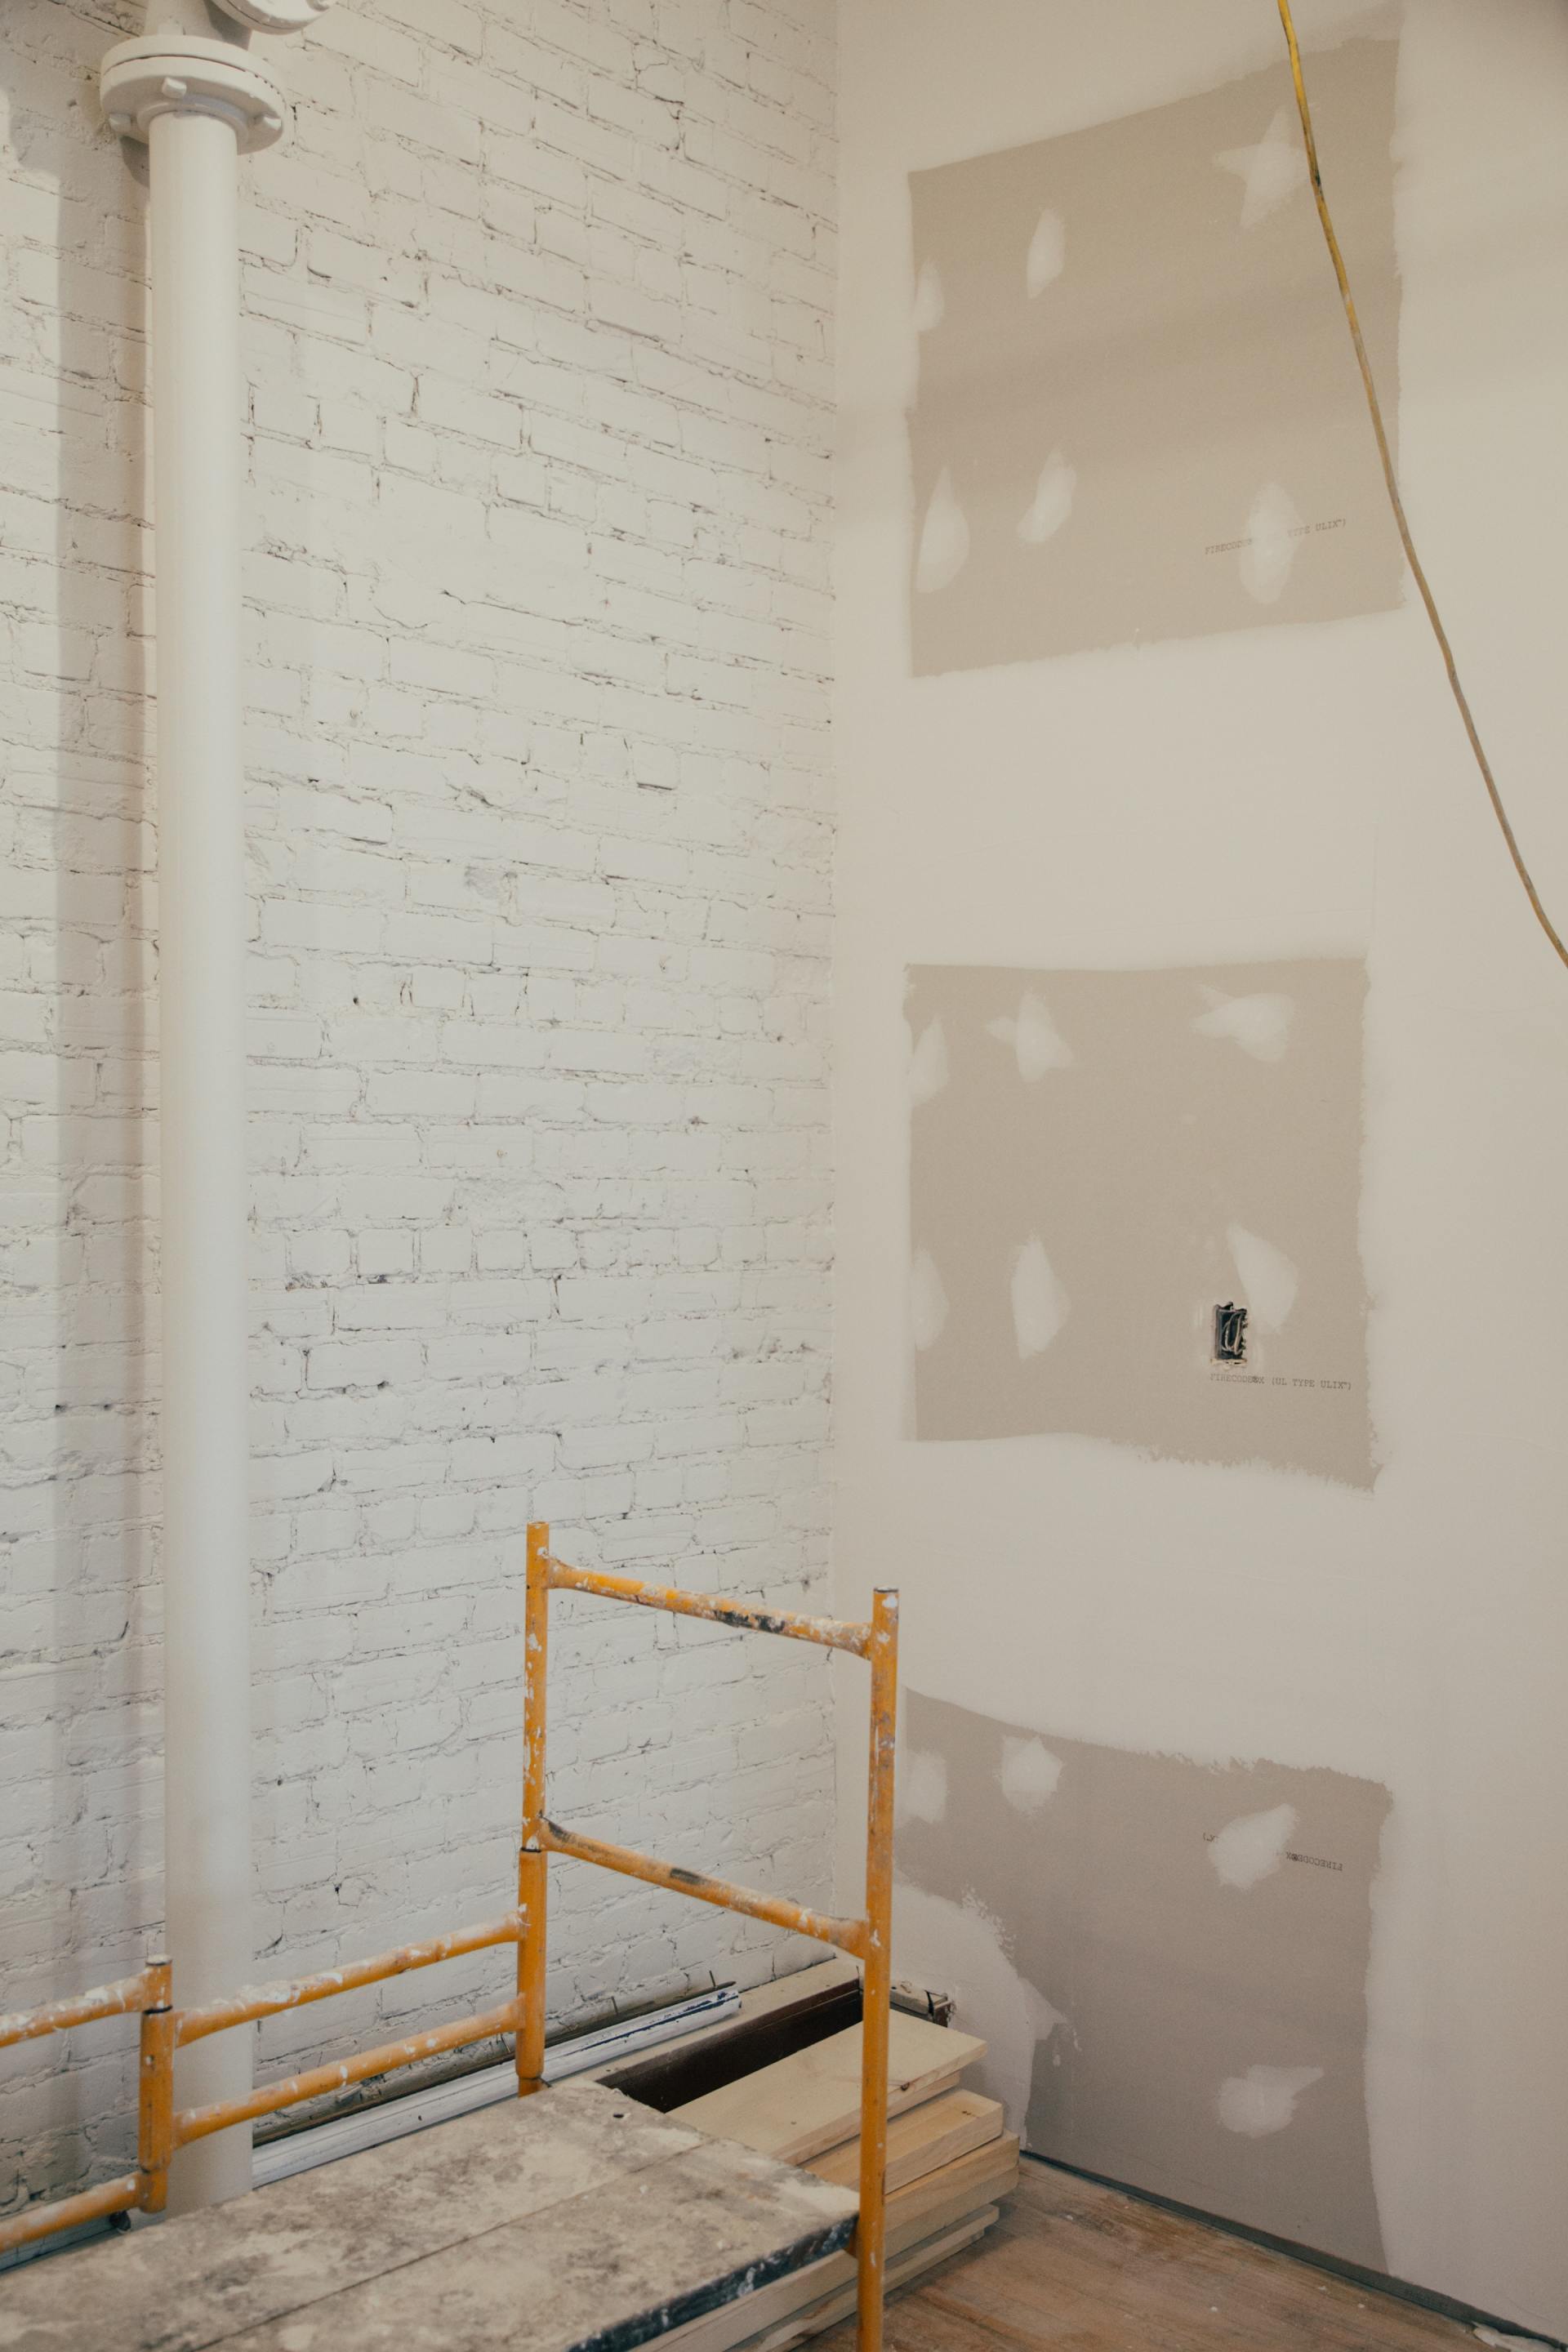 A room with white brick walls and a scaffolding in the corner.